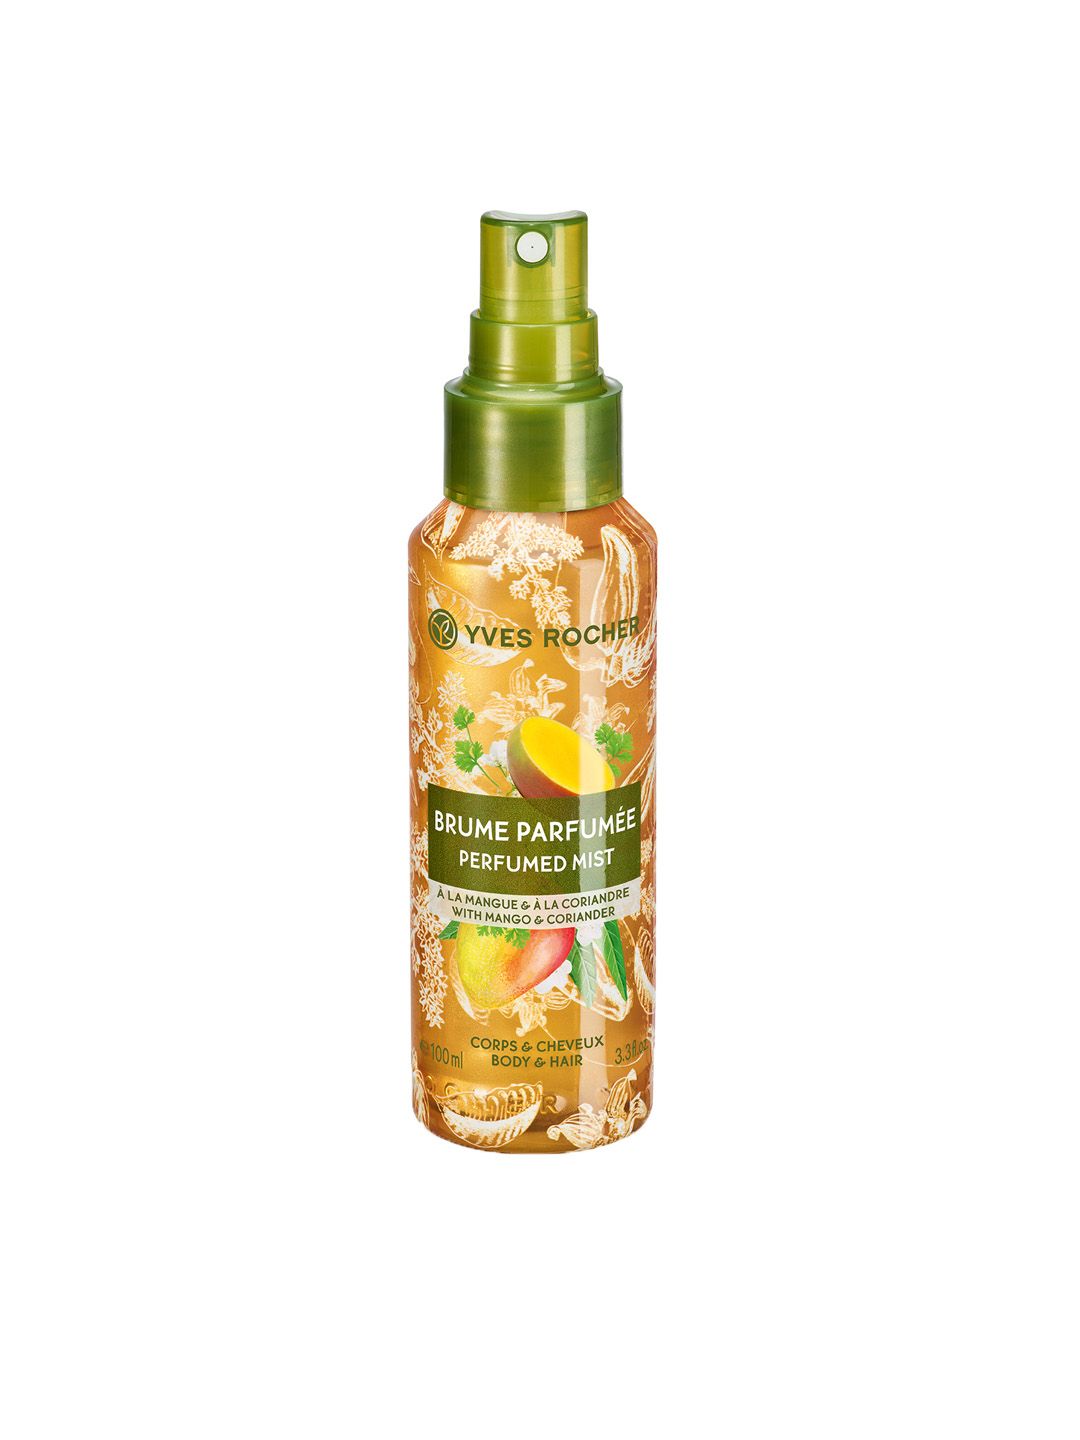 Yves Rocher Unisex Perfumed Sustainable Body & Hair Mist With Mango & Coriander 100 ml Price in India